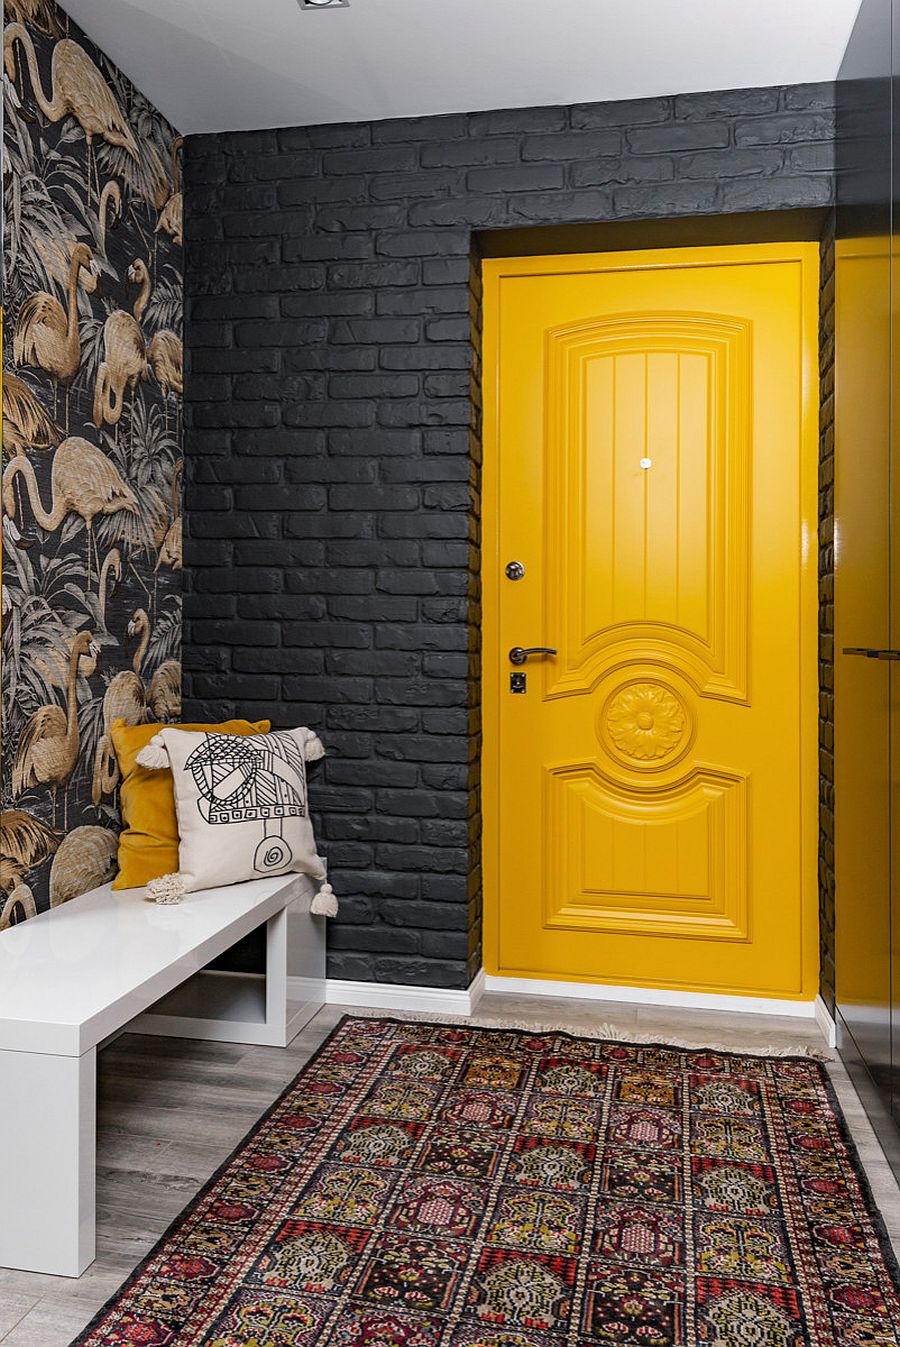 Striking-yellow-door-makes-the-grandest-visual-statement-in-this-dark-and-dashing-contemporary-entry-98983